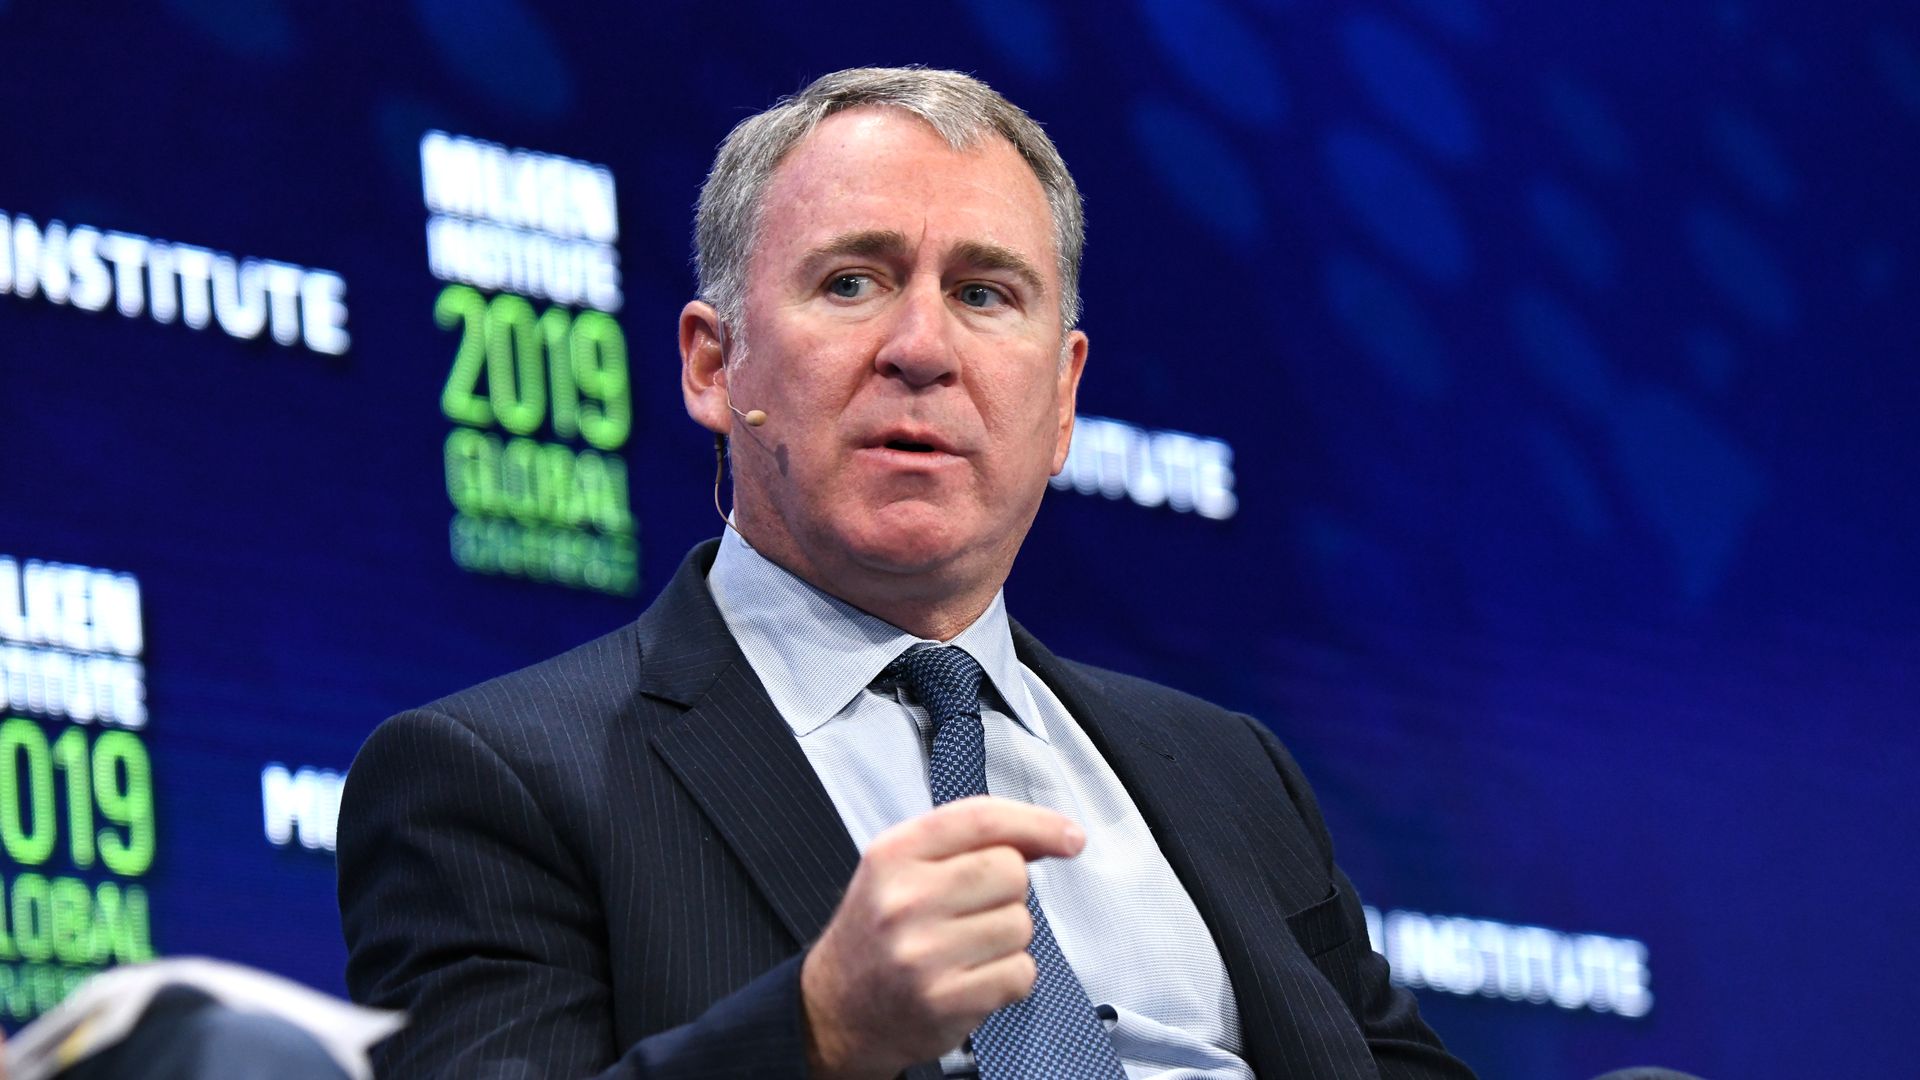 Ken Griffin participates in a panel discussion during the annual Milken Institute Global Conference at The Beverly Hilton Hotel on April 29, 2019 in Beverly Hills, California